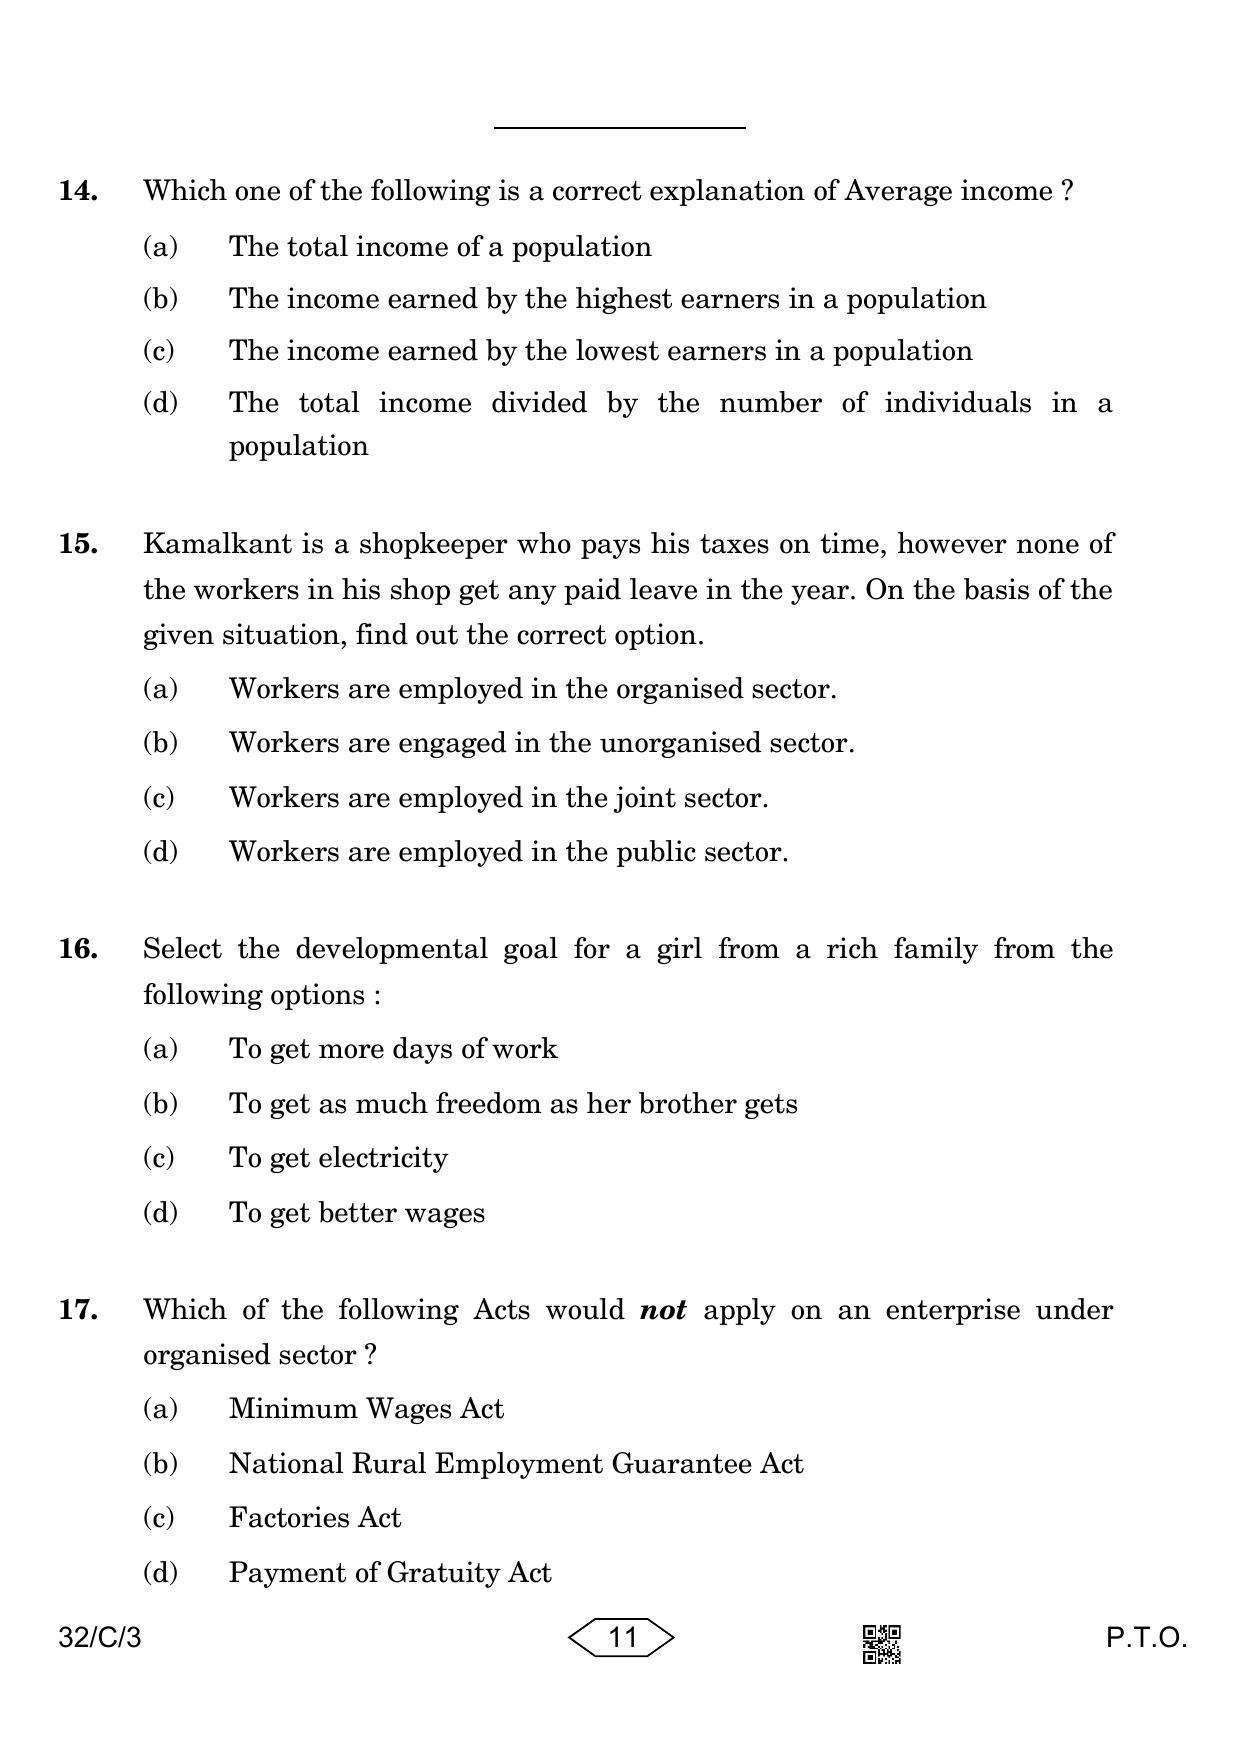 CBSE Class 10 32-3 Social Science 2023 (Compartment) Question Paper - Page 11